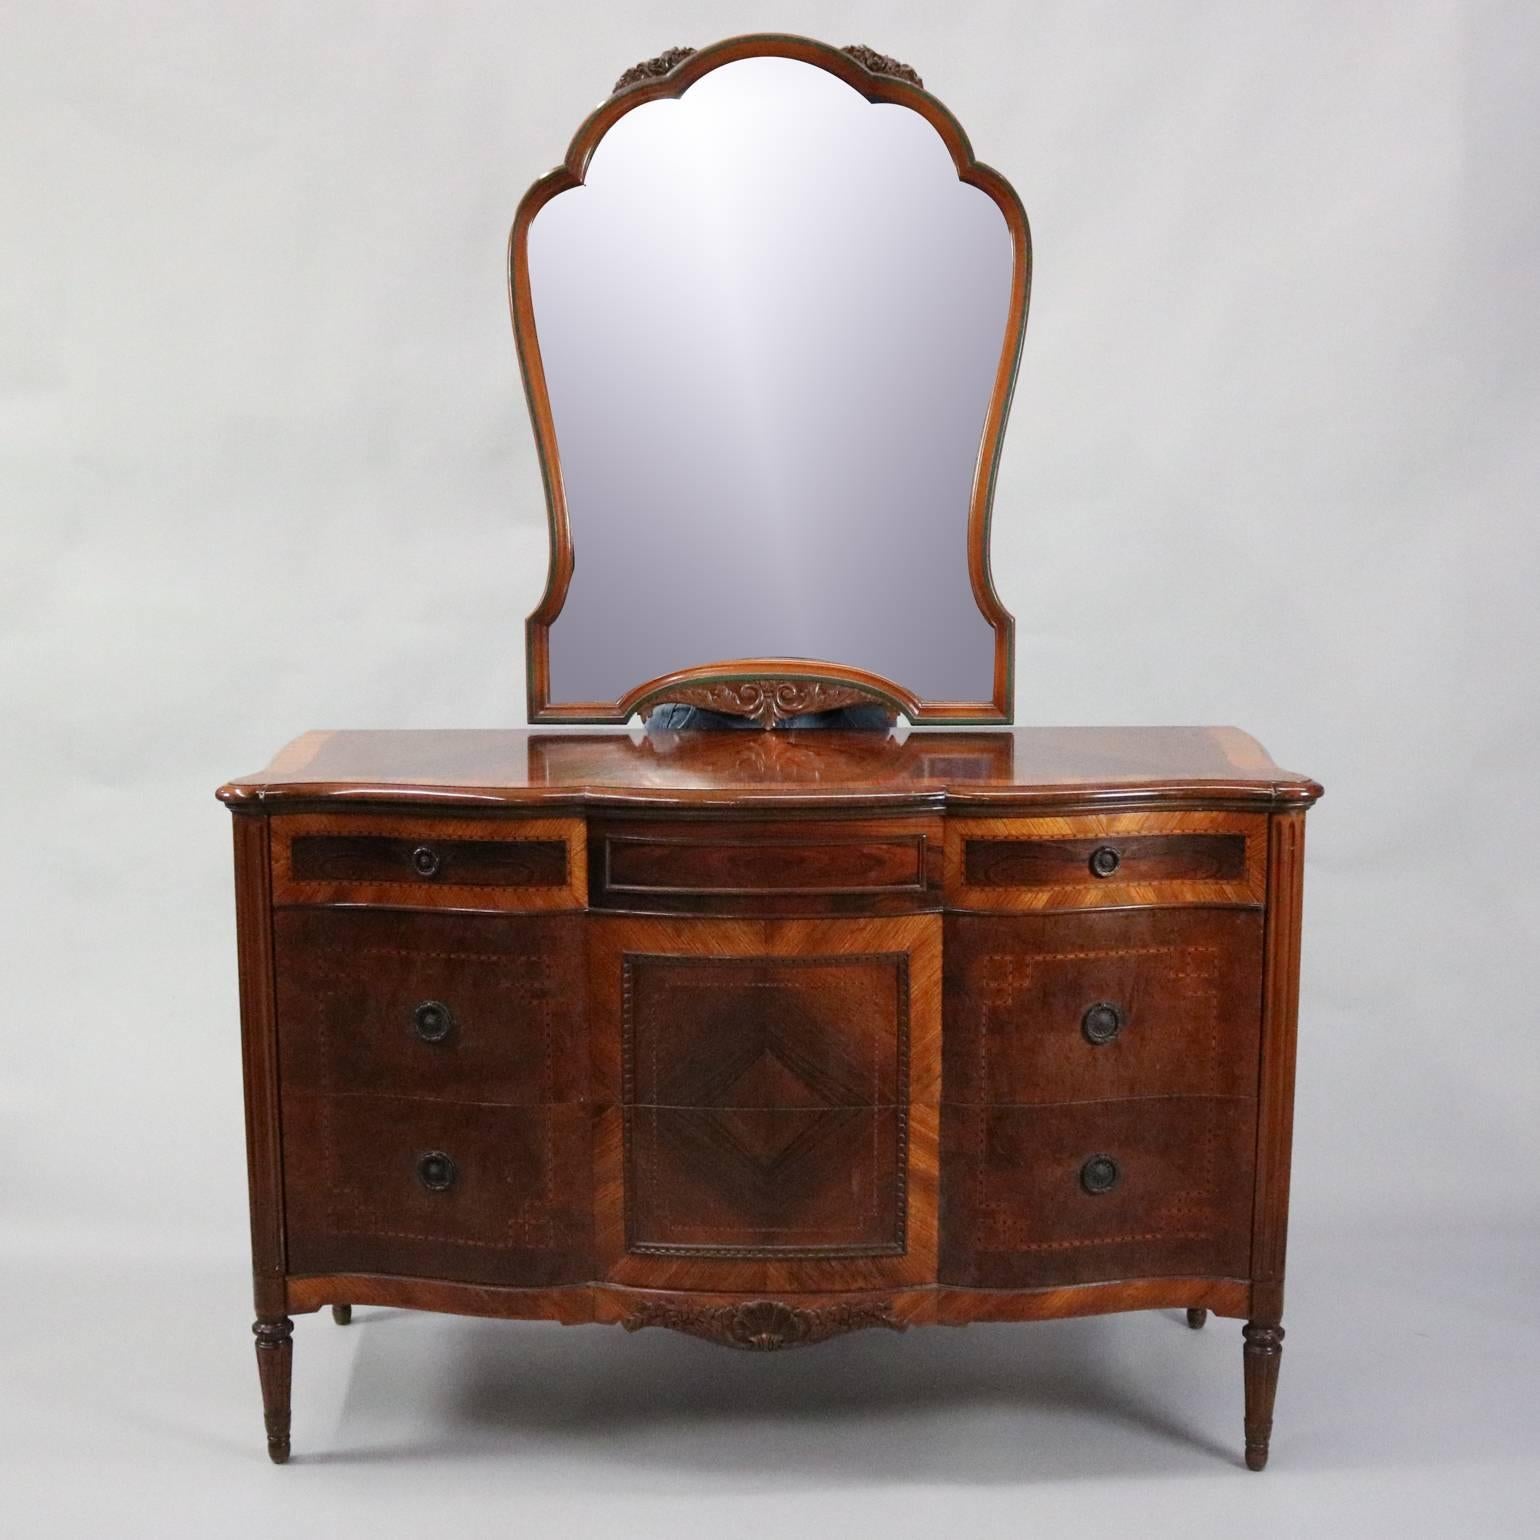 Antique mirrored low chest features bookmatched flame mahogany and burl panels with deeply striated and inlaid parquetry bordering, carved foliate and floral accents, bronze hardware, circa 1920

*Matching high chest and vanity listed